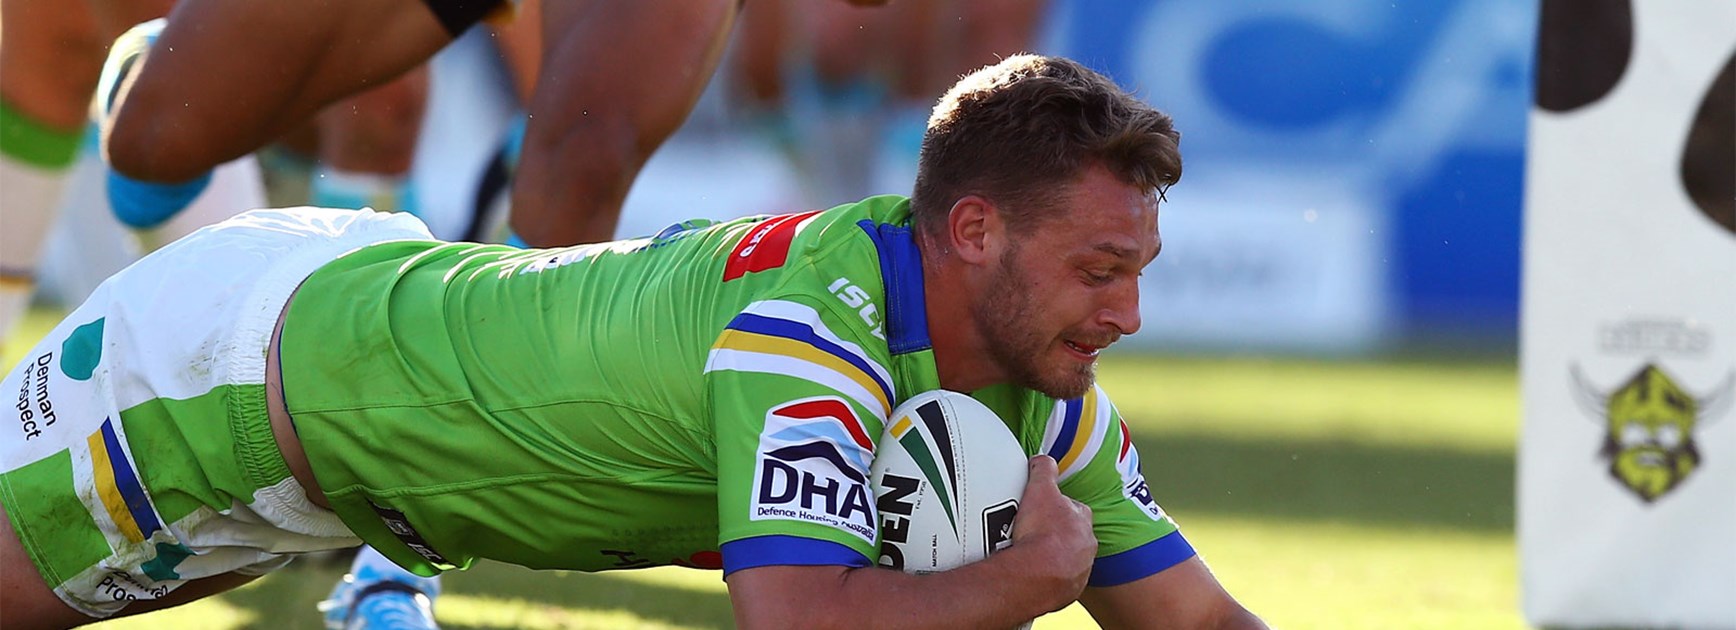 Raiders forward Elliot Whitehead scores for Canberra against the Titans on Saturday.